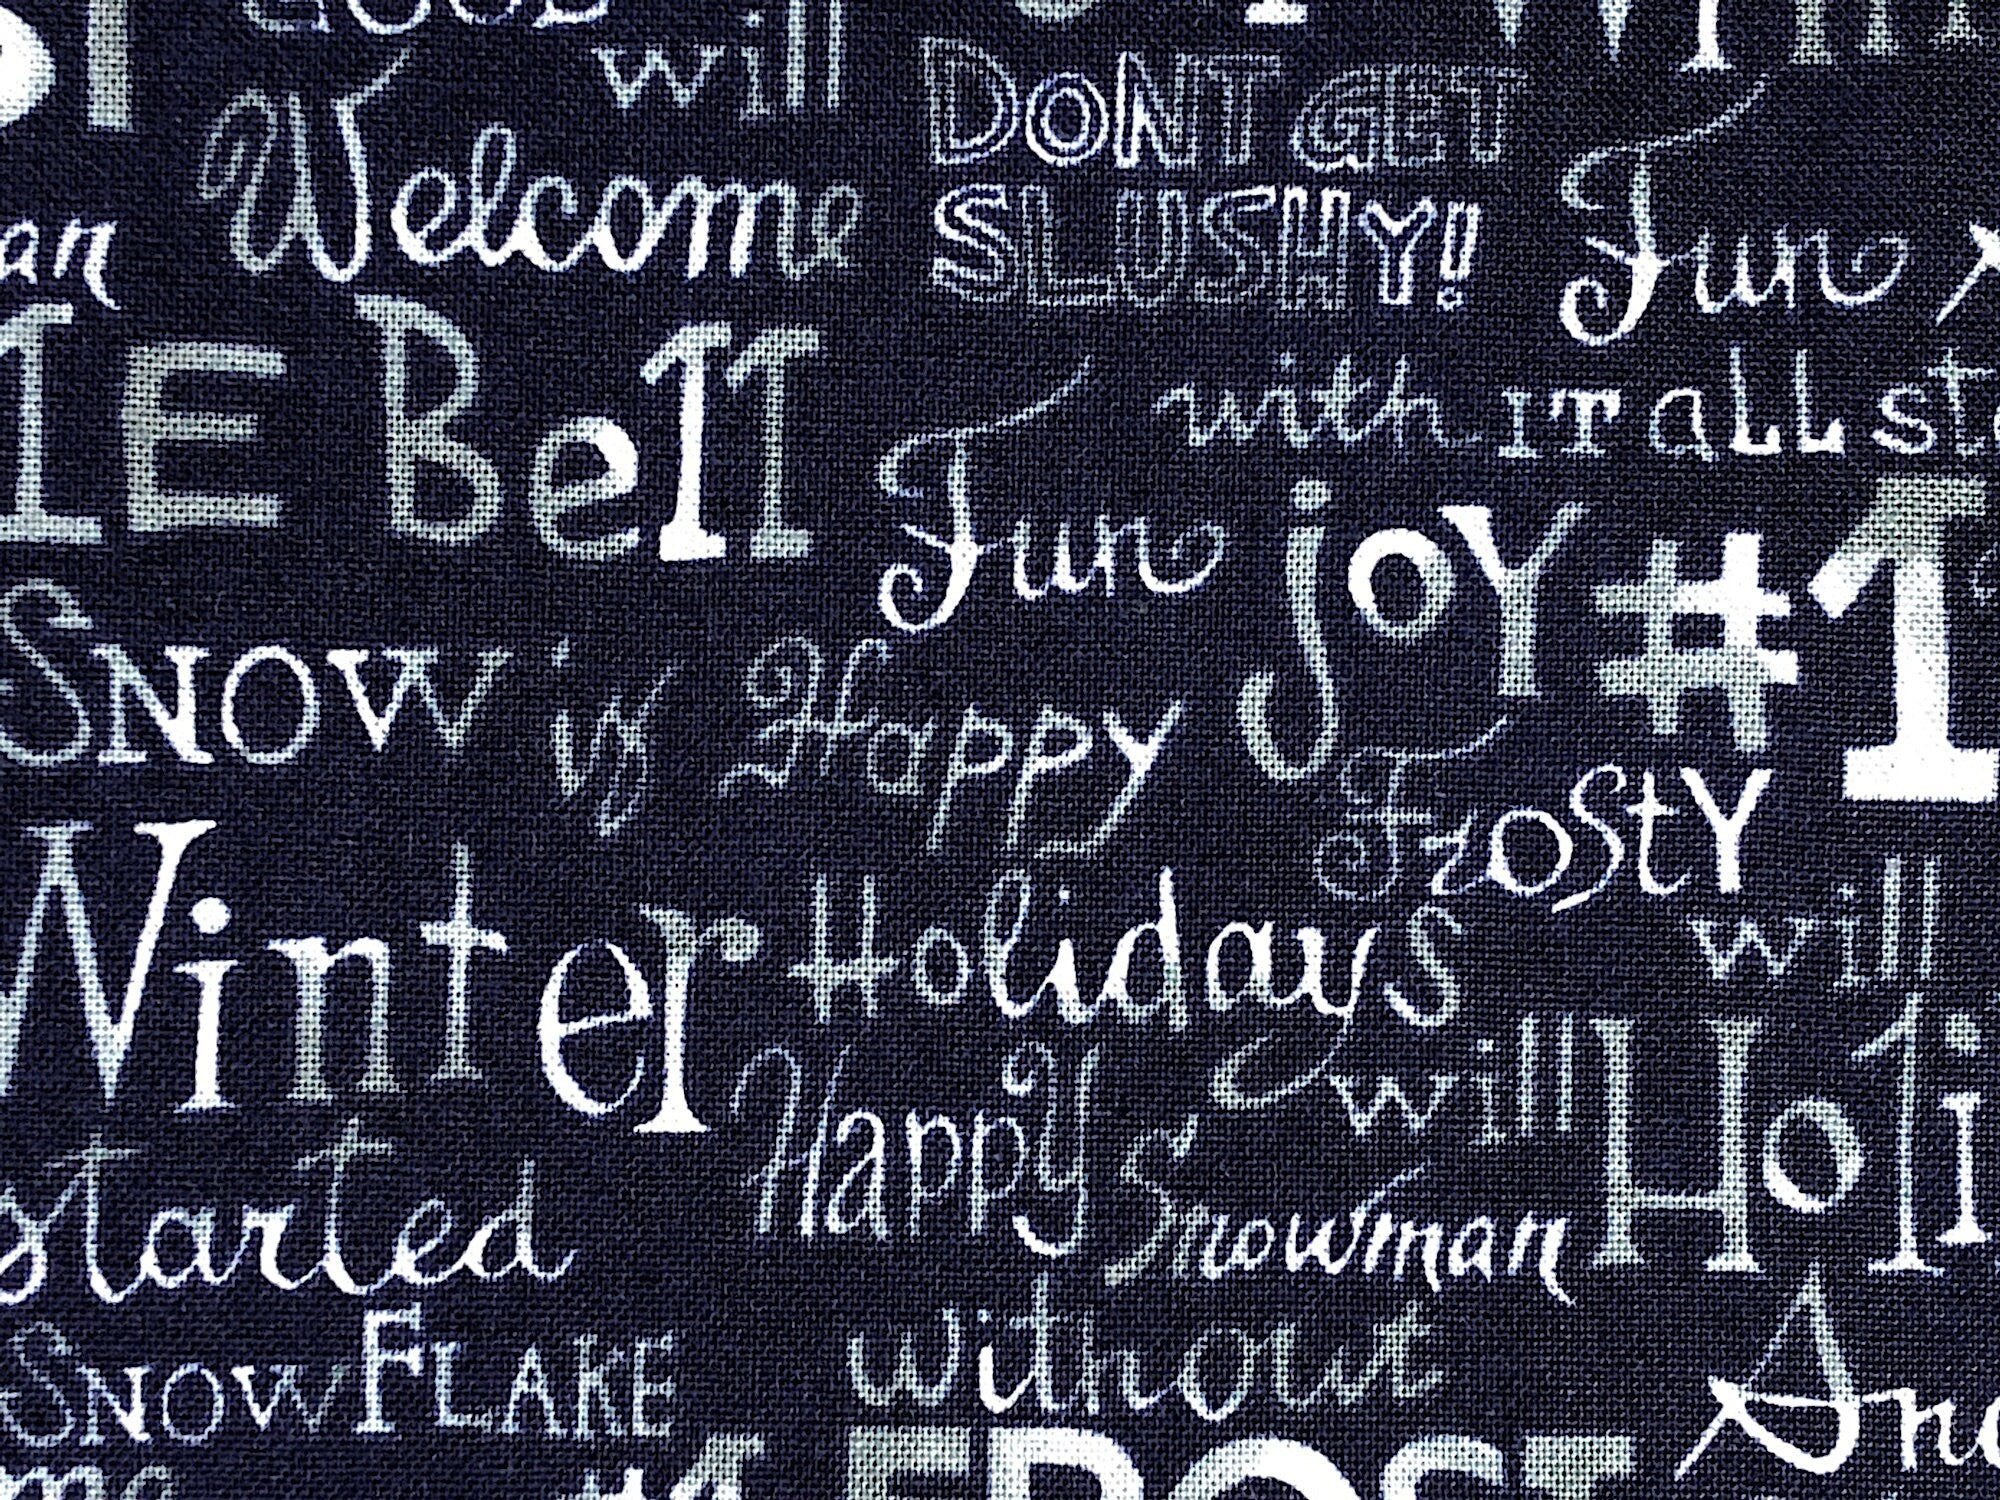 Close up of fun, joy frosty, holidays, winter and more.